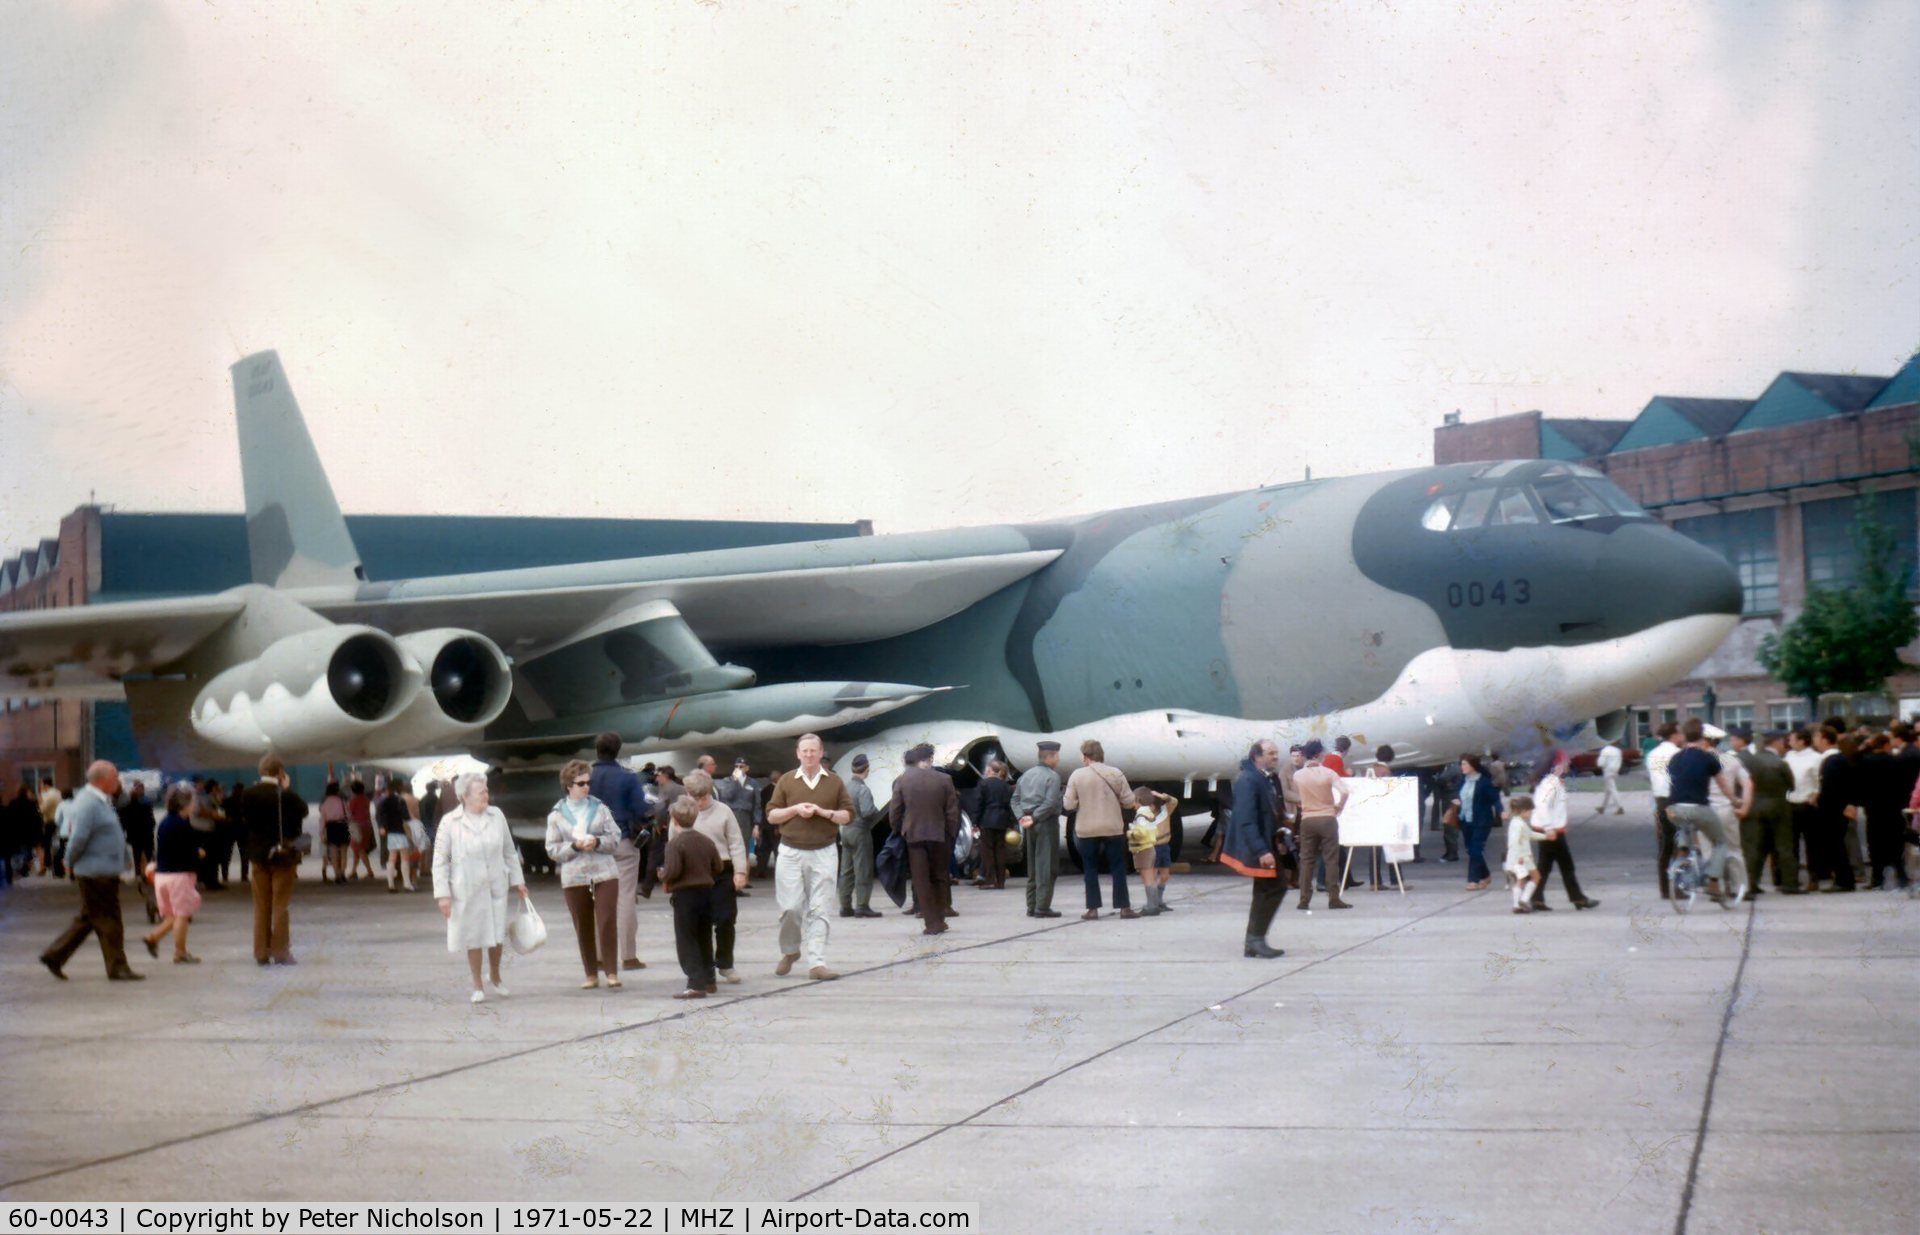 60-0043, 1960 Boeing B-52H Stratofortress C/N 464408, B-52H Stratofortress of 17 Bombardment Wing on display at the 1971 Mildenhall Airshow - complete with two AGM-28 Hound Dog air-to-surface missiles. (my only sighting of these!!)